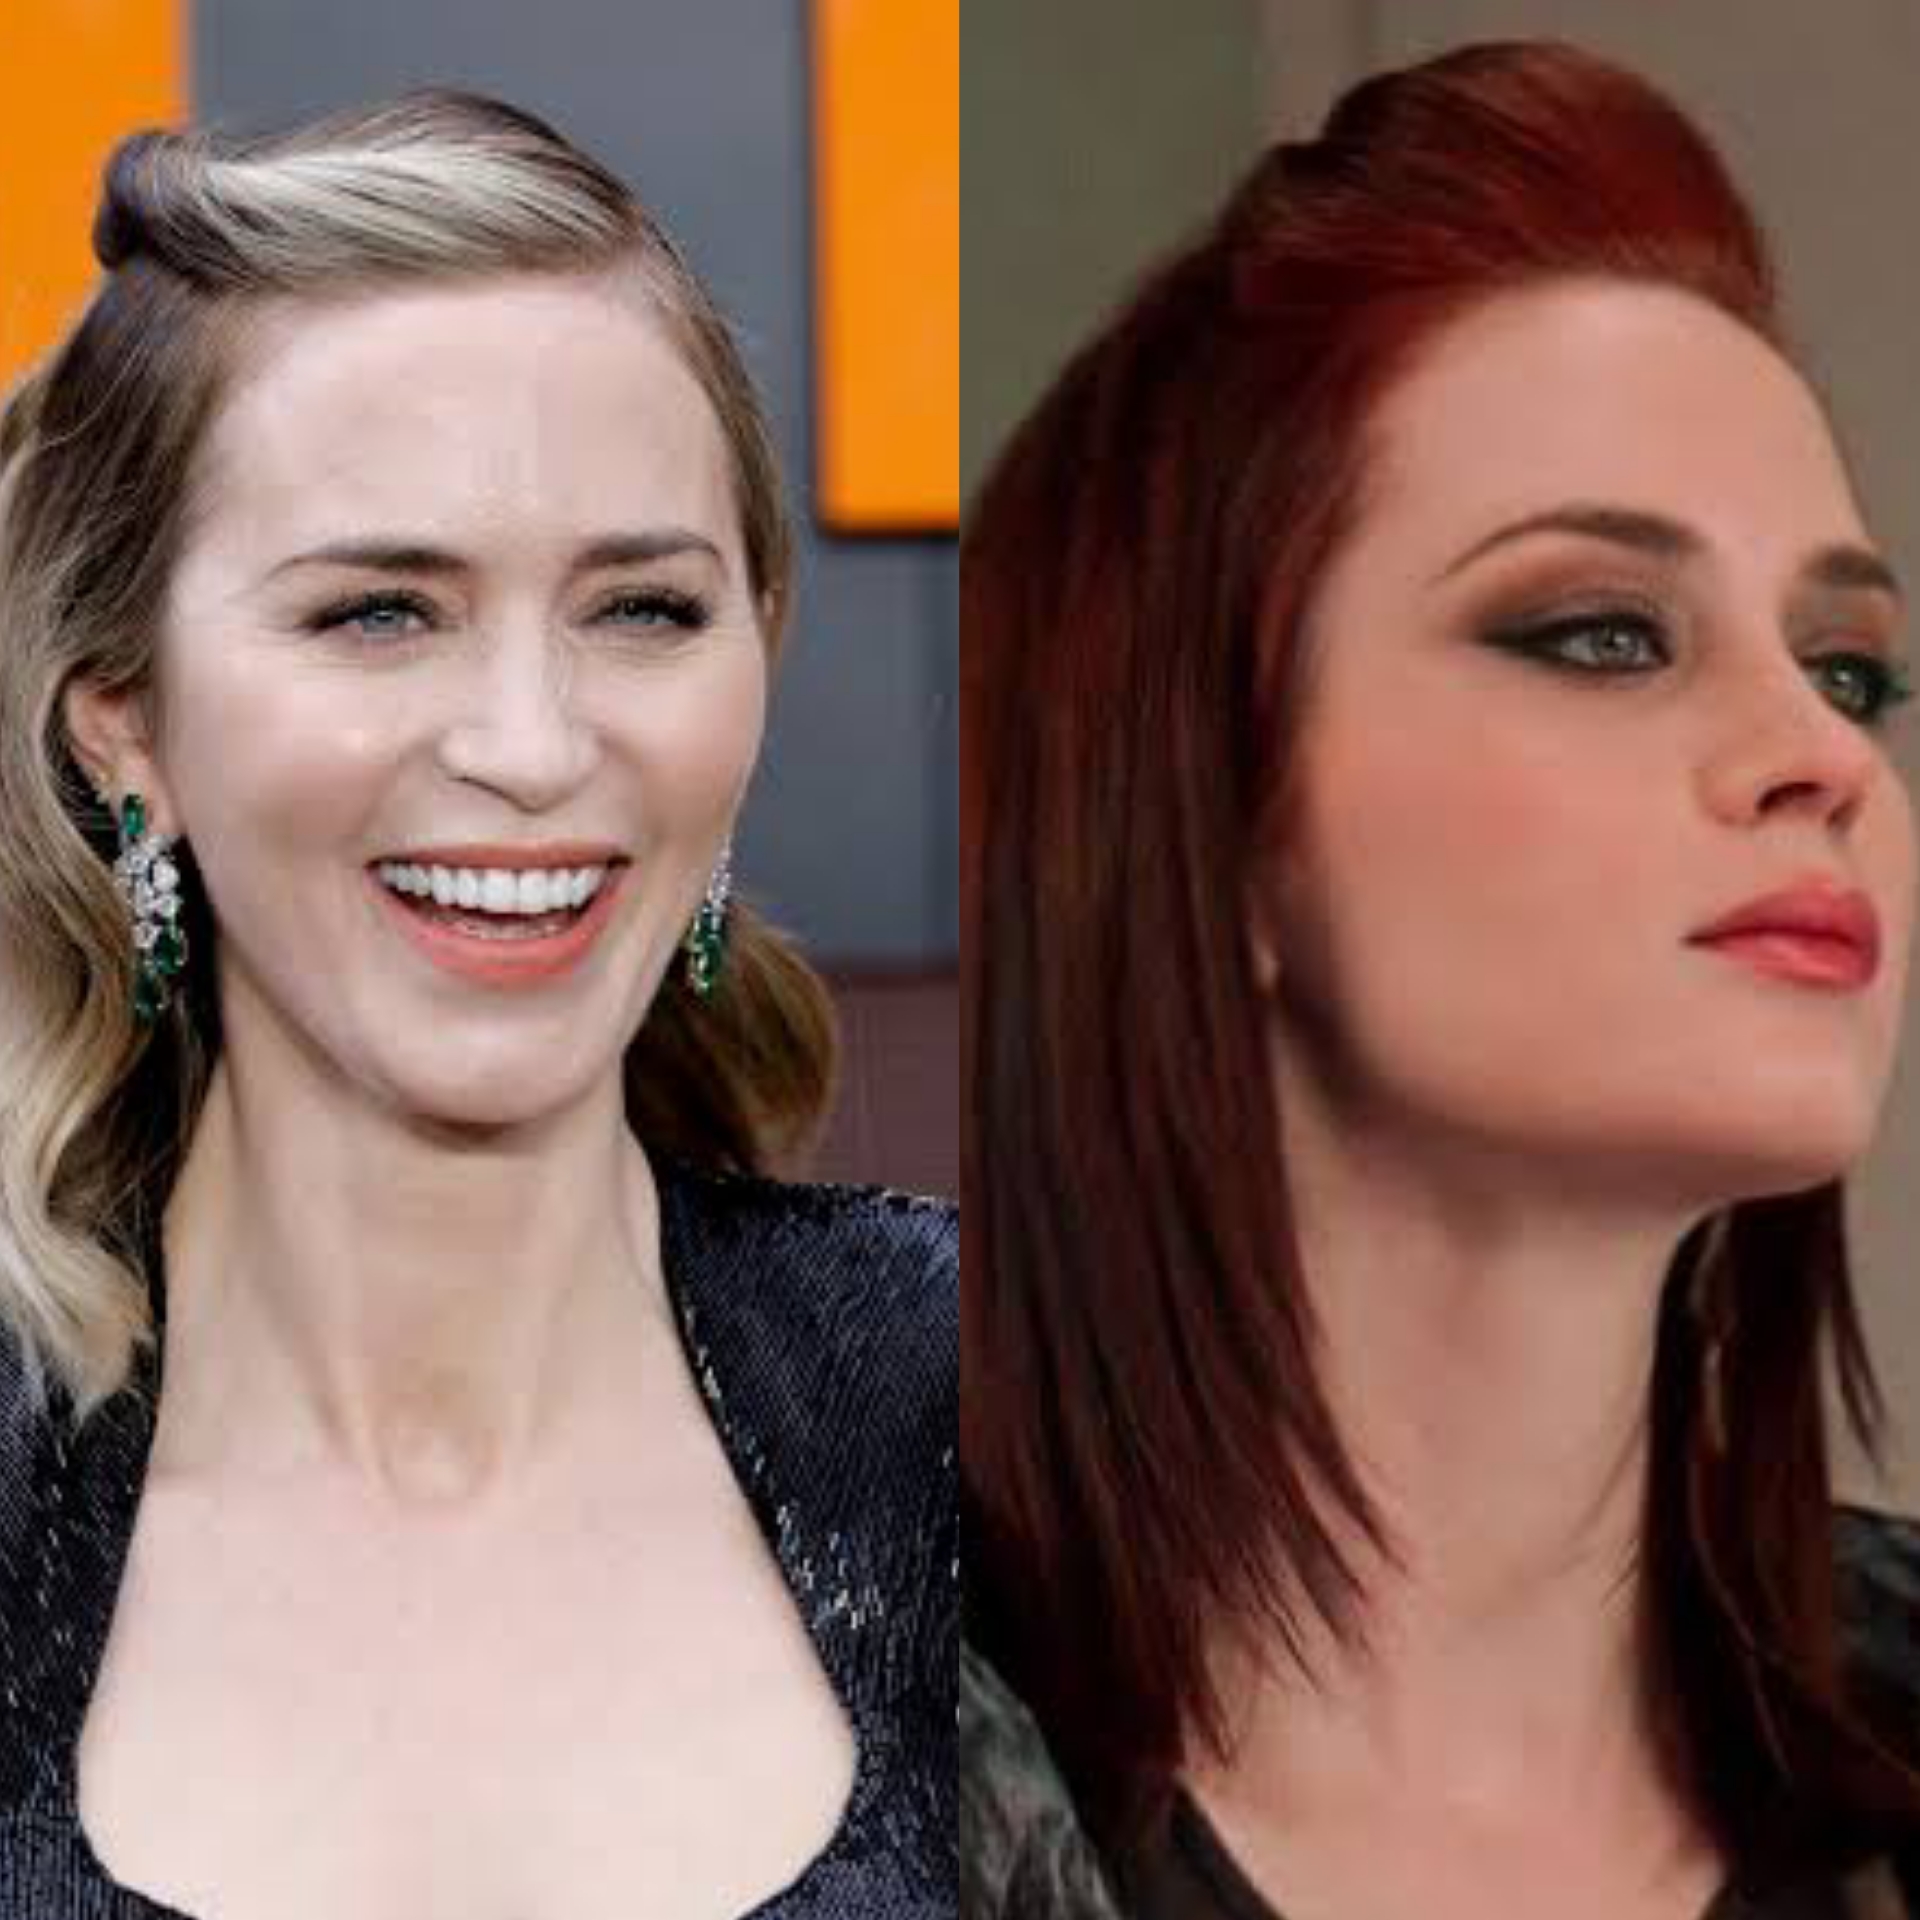 Emily Blunt’s Role in the Devil Wears Prada Changed Her Life in More Ways Than One